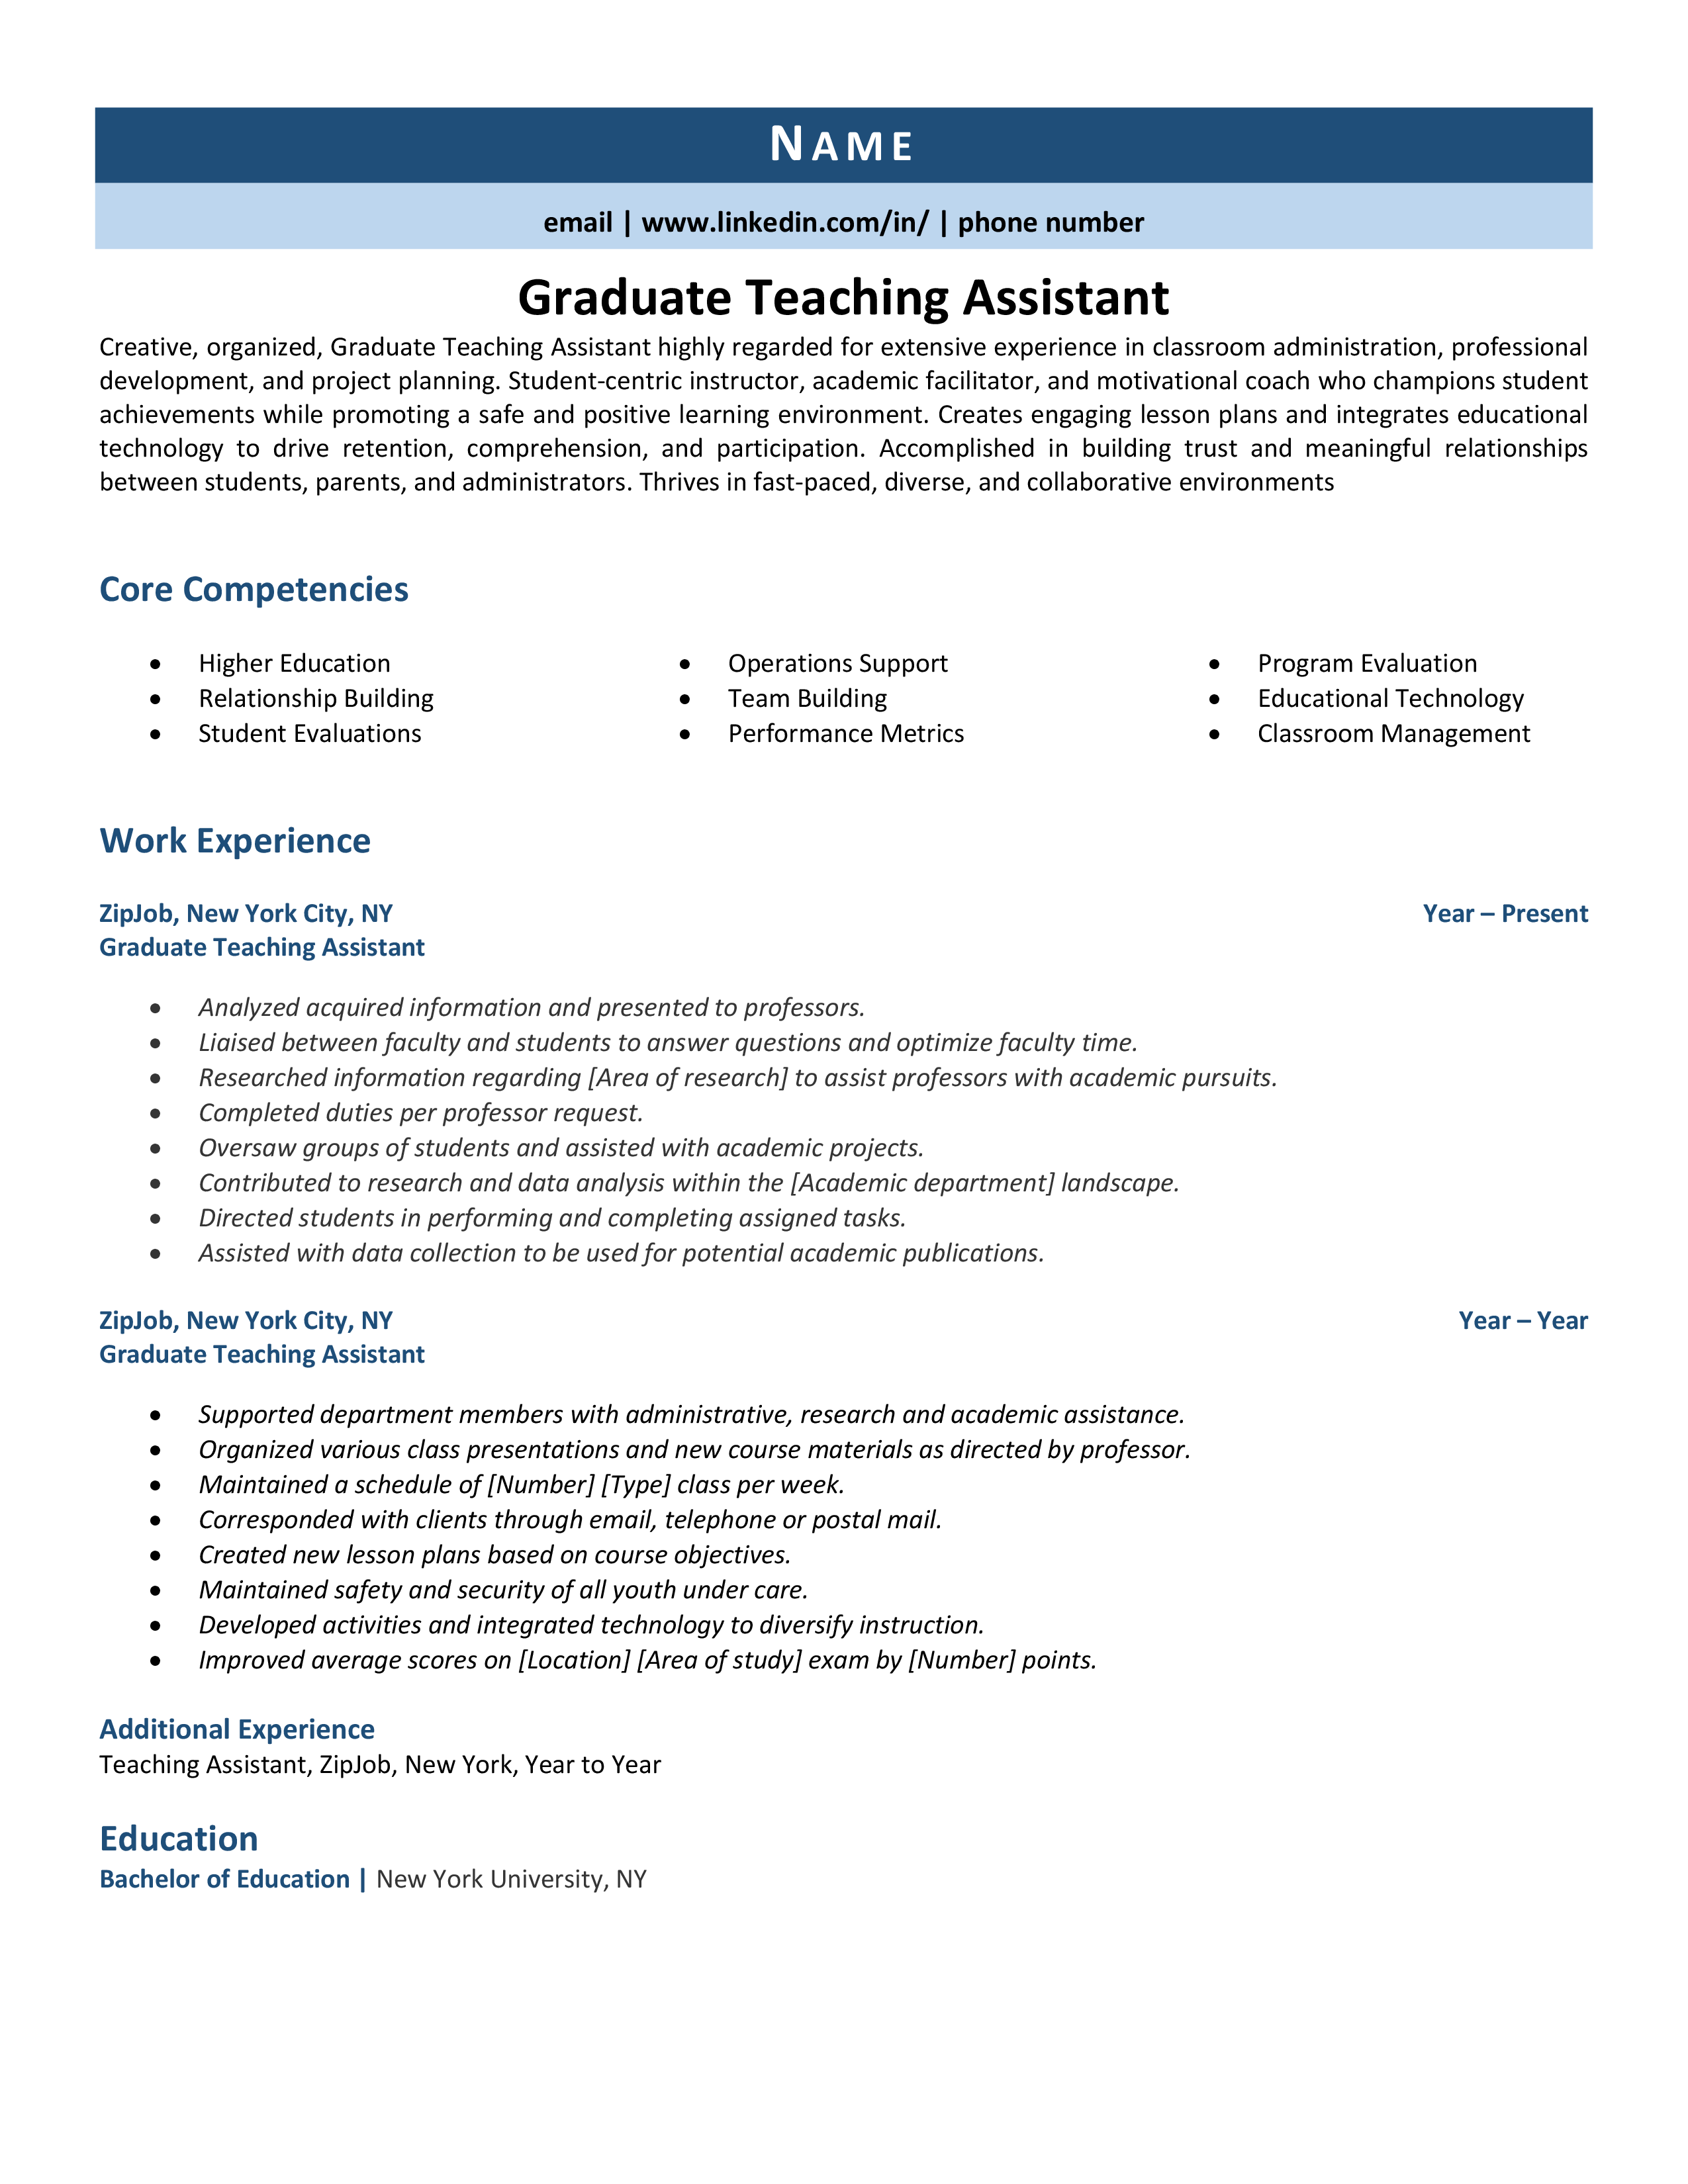 Graduate Teaching Assistant Resume Example And 3 Expert Tips Zipjob